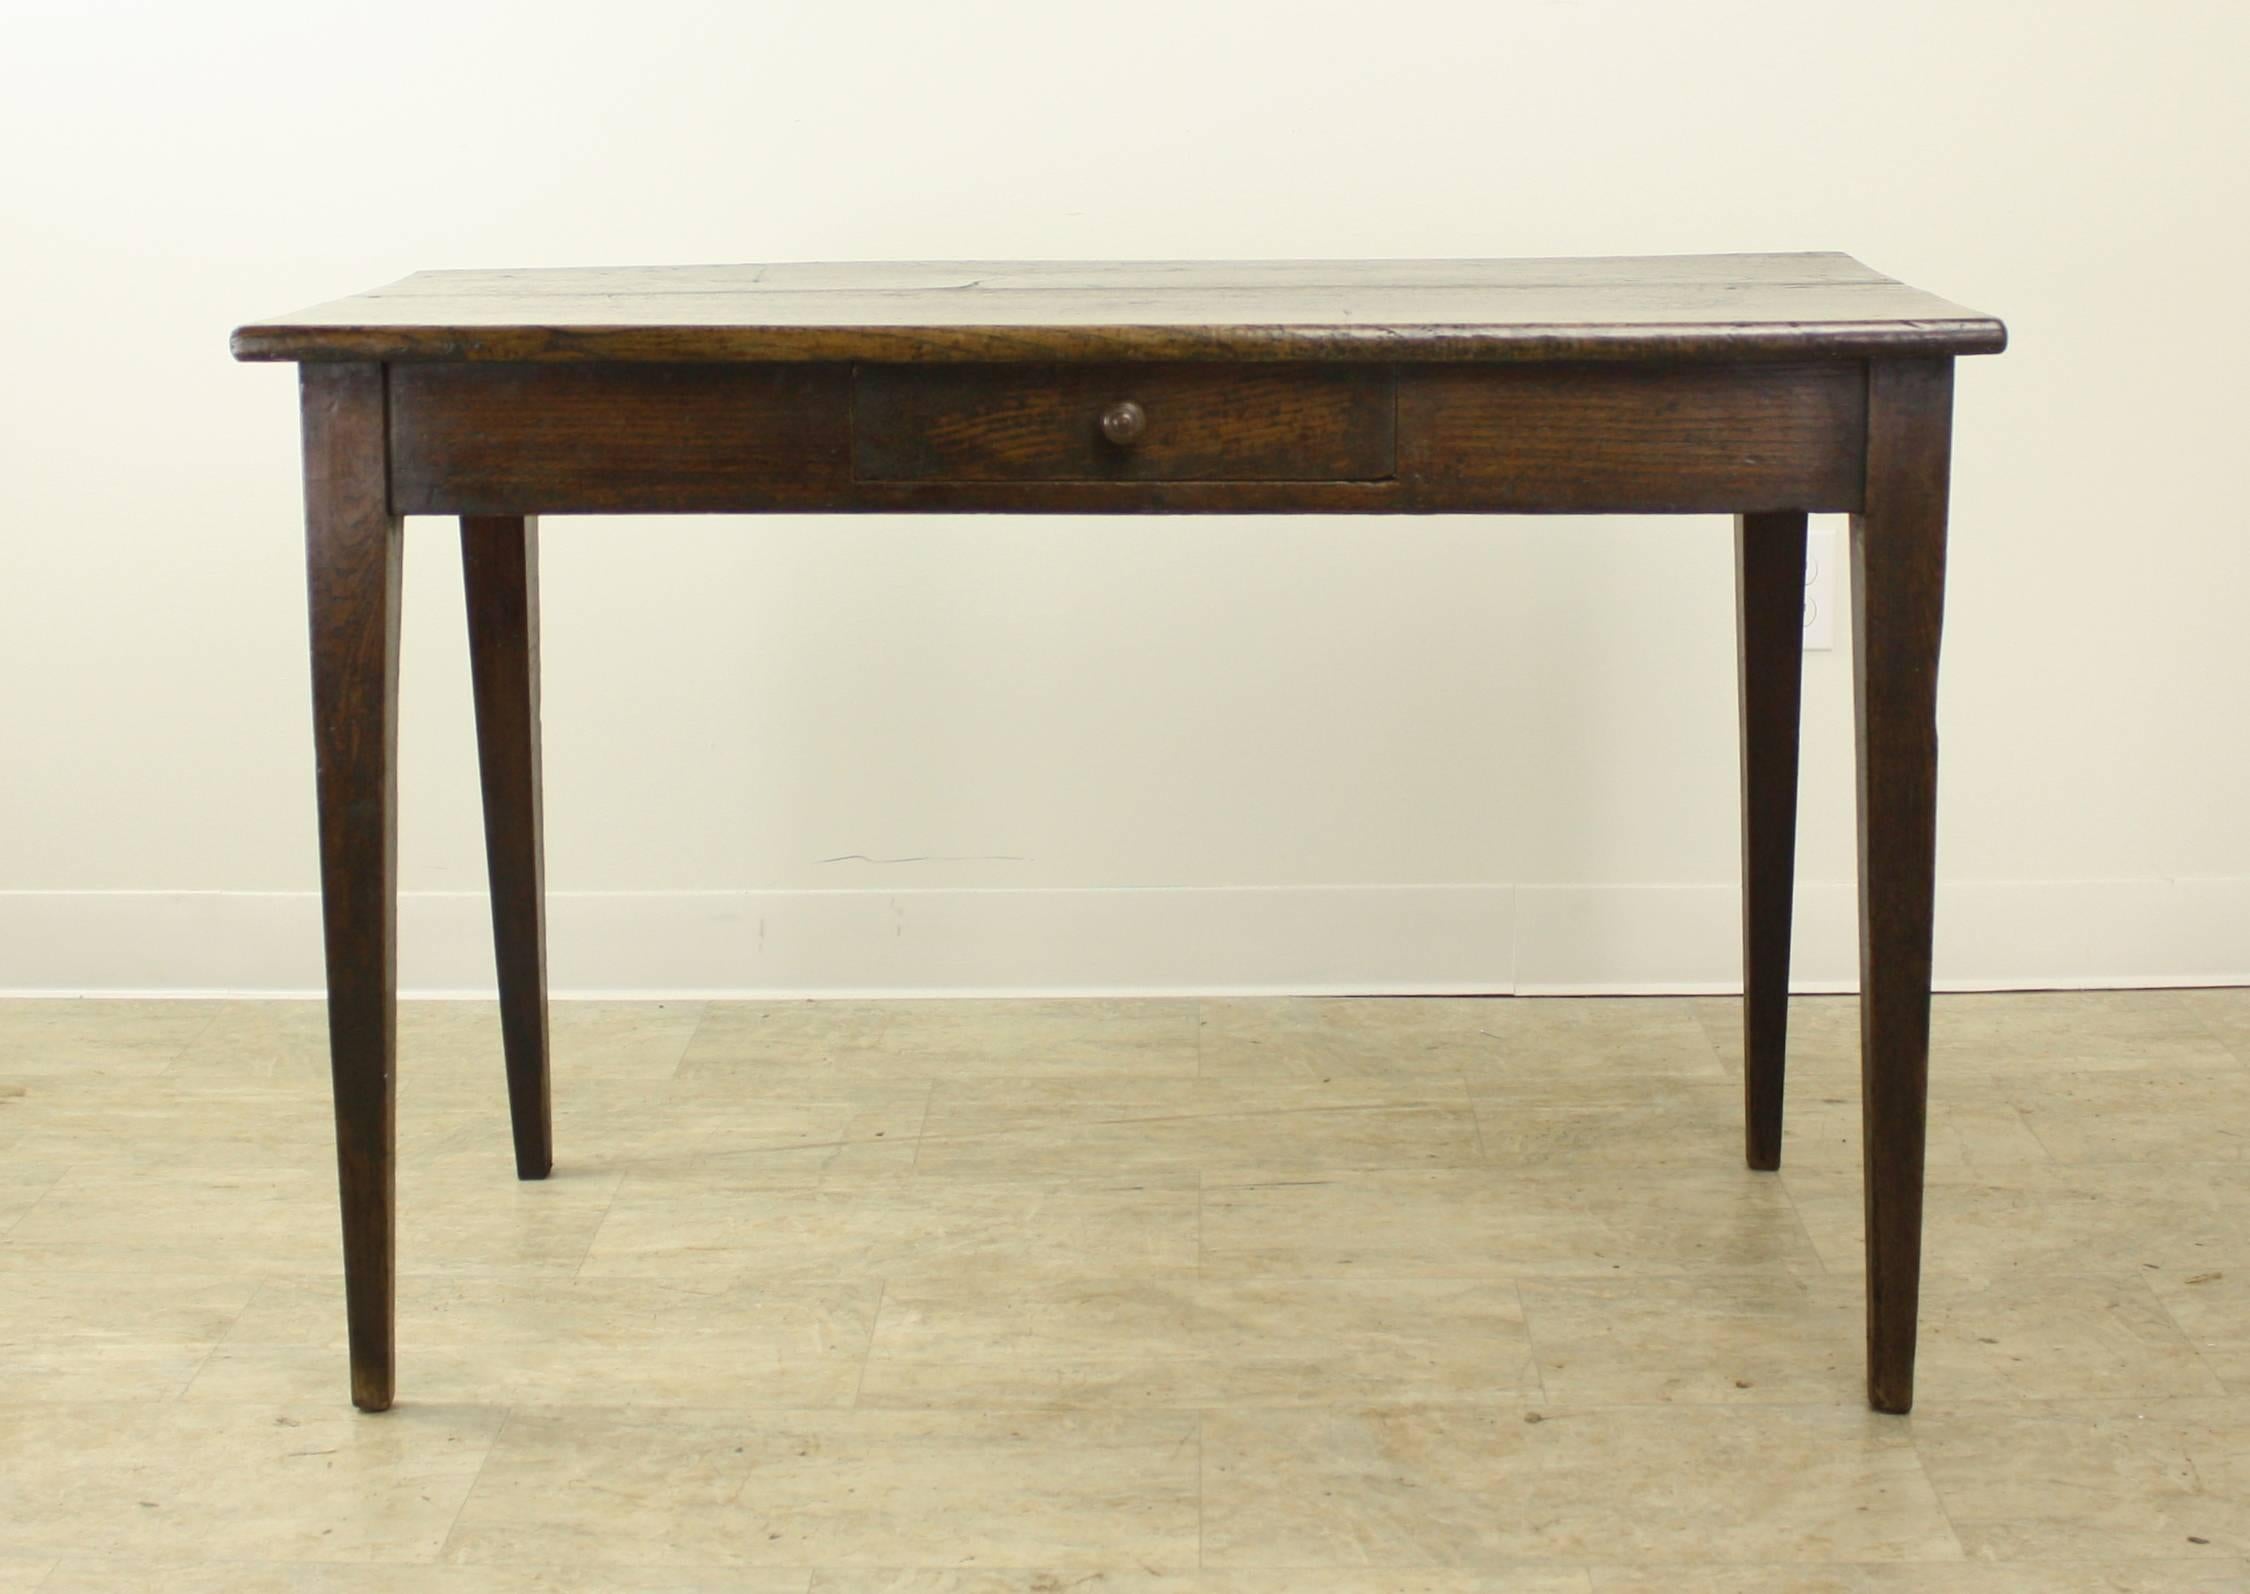 A charming chestnut writing table or occasional table with a shallow depth for smaller spaces. The thick chunky top has wonderful deep brown color and shine. The single drawer adds a note of interest, as well a bit of storage.